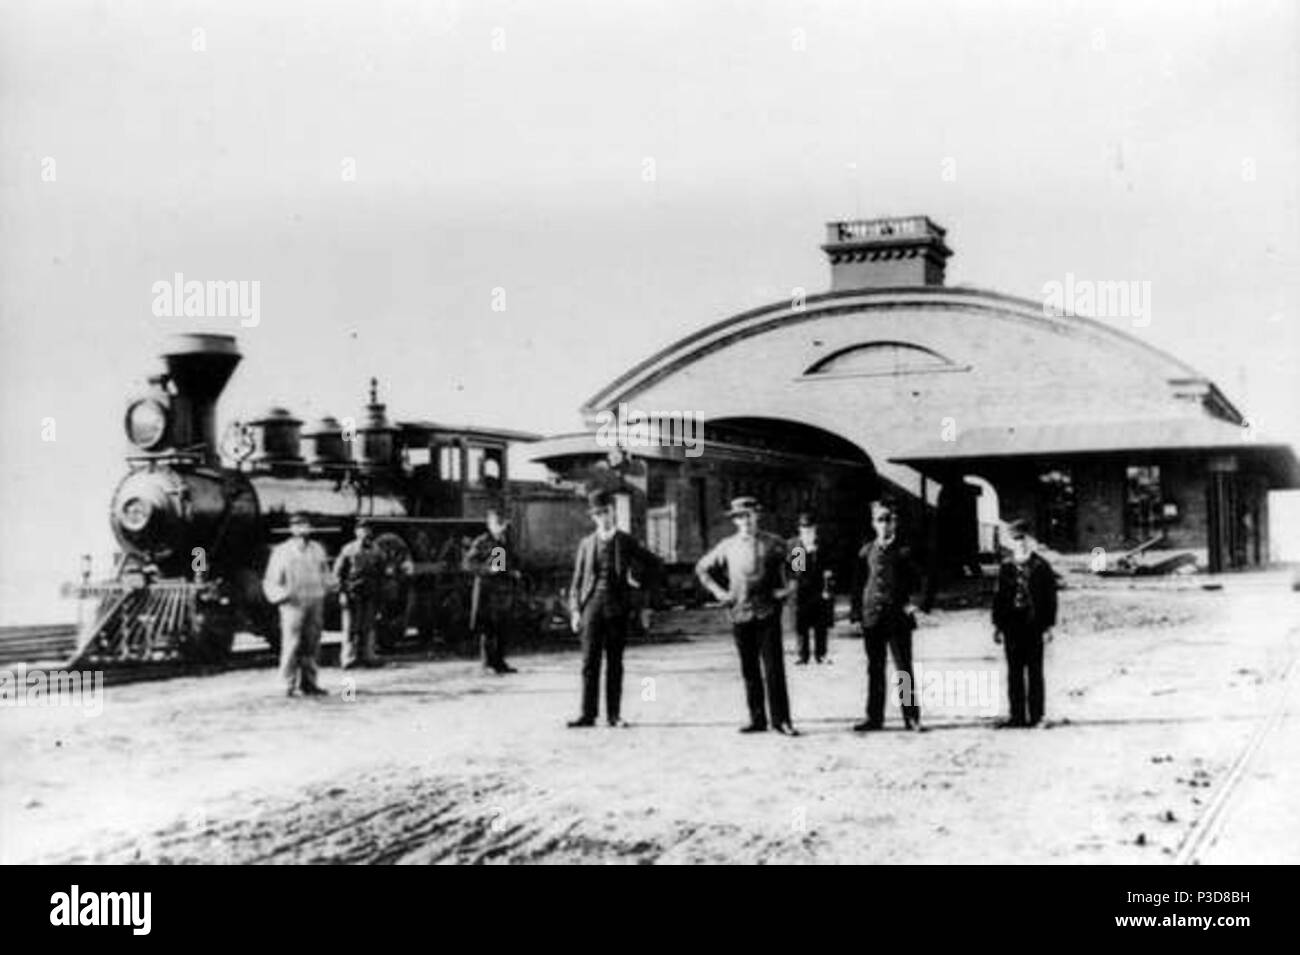 . English: Old Colony Railroad' station at Fairhaven, Massachusetts, on the Fairhaven Branch, circa 1880. The locomotive pictured is OCRR #7, The 'Northern'. The men pictured are (left to right): unknown, Edmund F. Williams, George Williams, unknown, Harry Williams, Nathan Manter, Edward Keith, Edward Jenney. circa 1880. Unknown 3 Old Colony Railroad Passenger Station at Fairhaven, MA Stock Photo